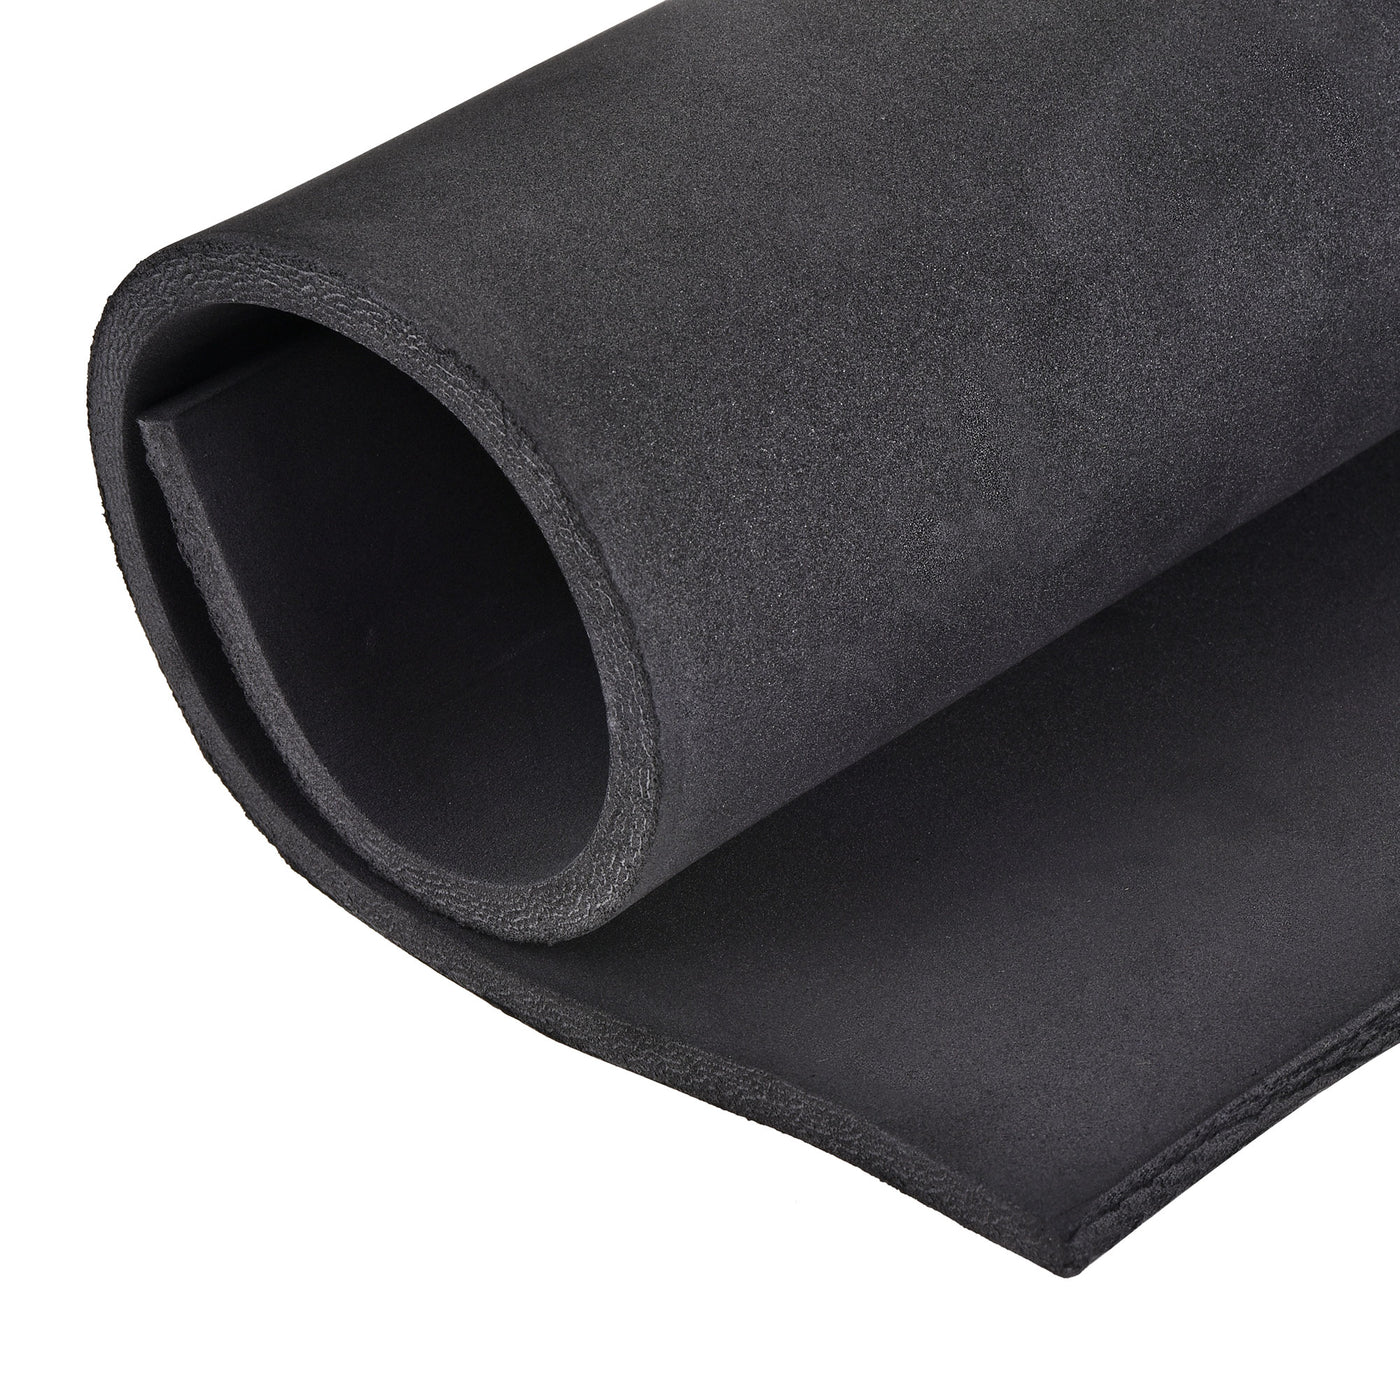 Uxcell Uxcell Black EVA Foam Sheets Roll 13 x 19 Inch 1mm Thick for Crafts DIY Projects